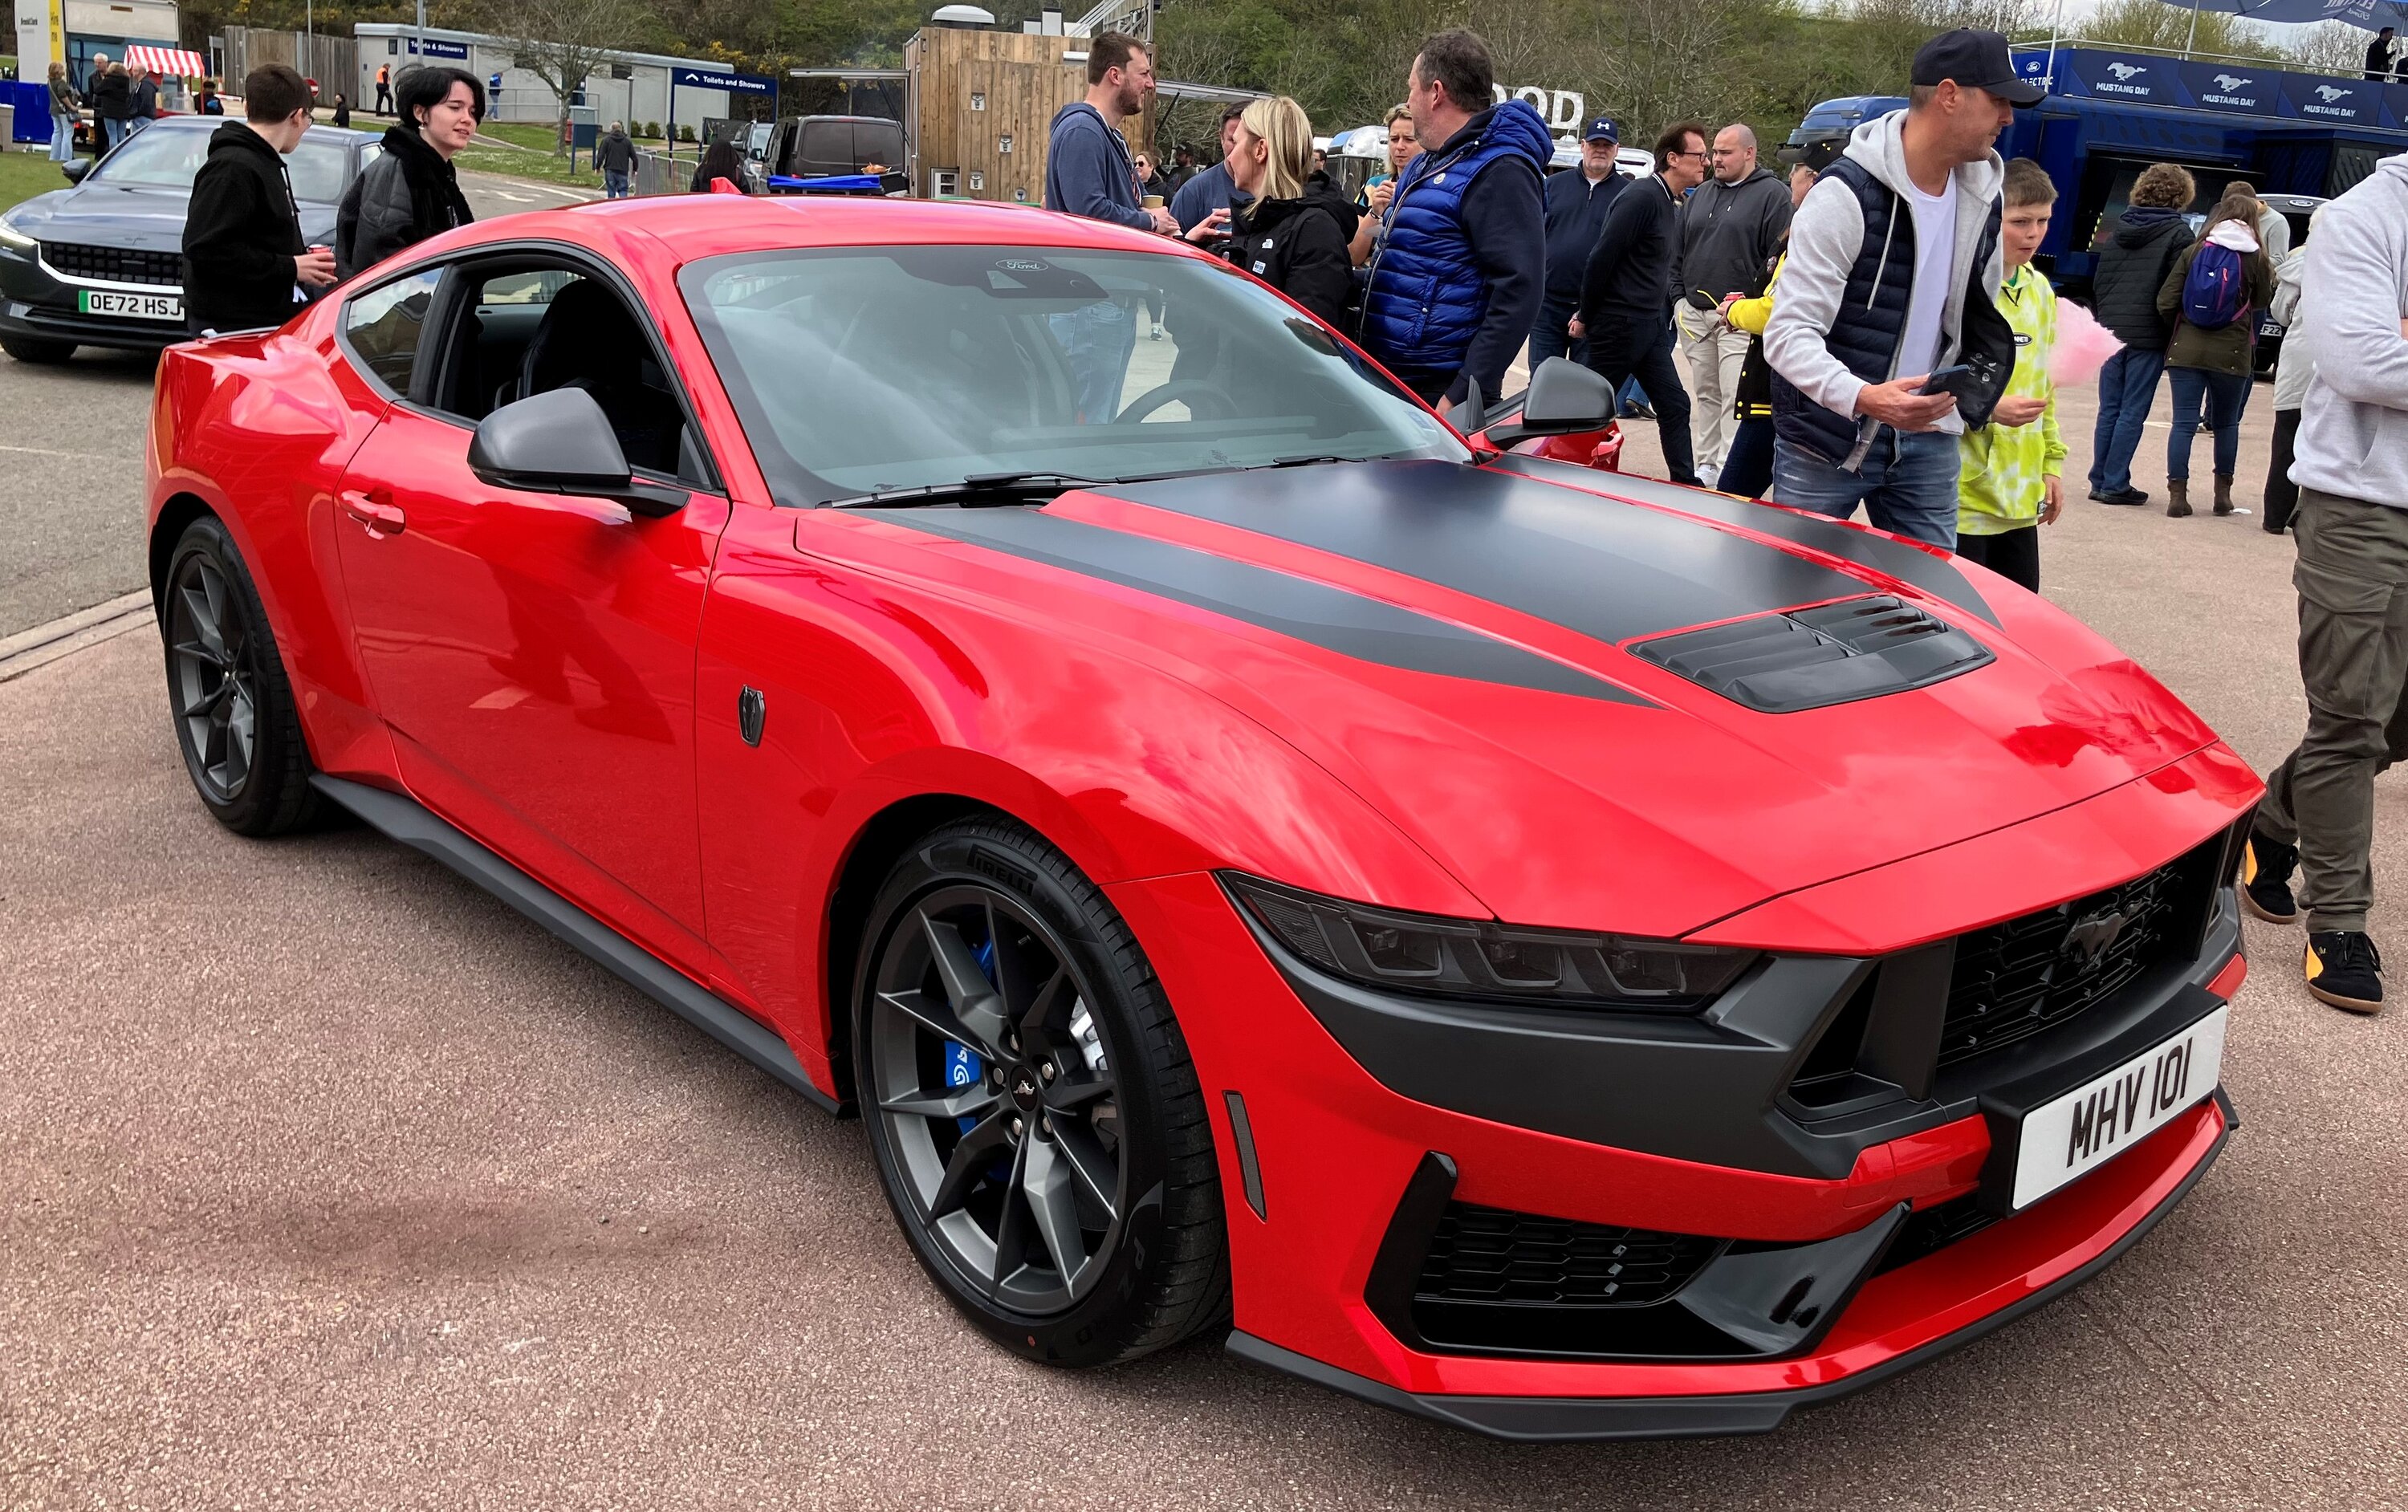 S650 Mustang UK reveal of the S650: Race Red Dark Horse Mustang DH 5.JPG